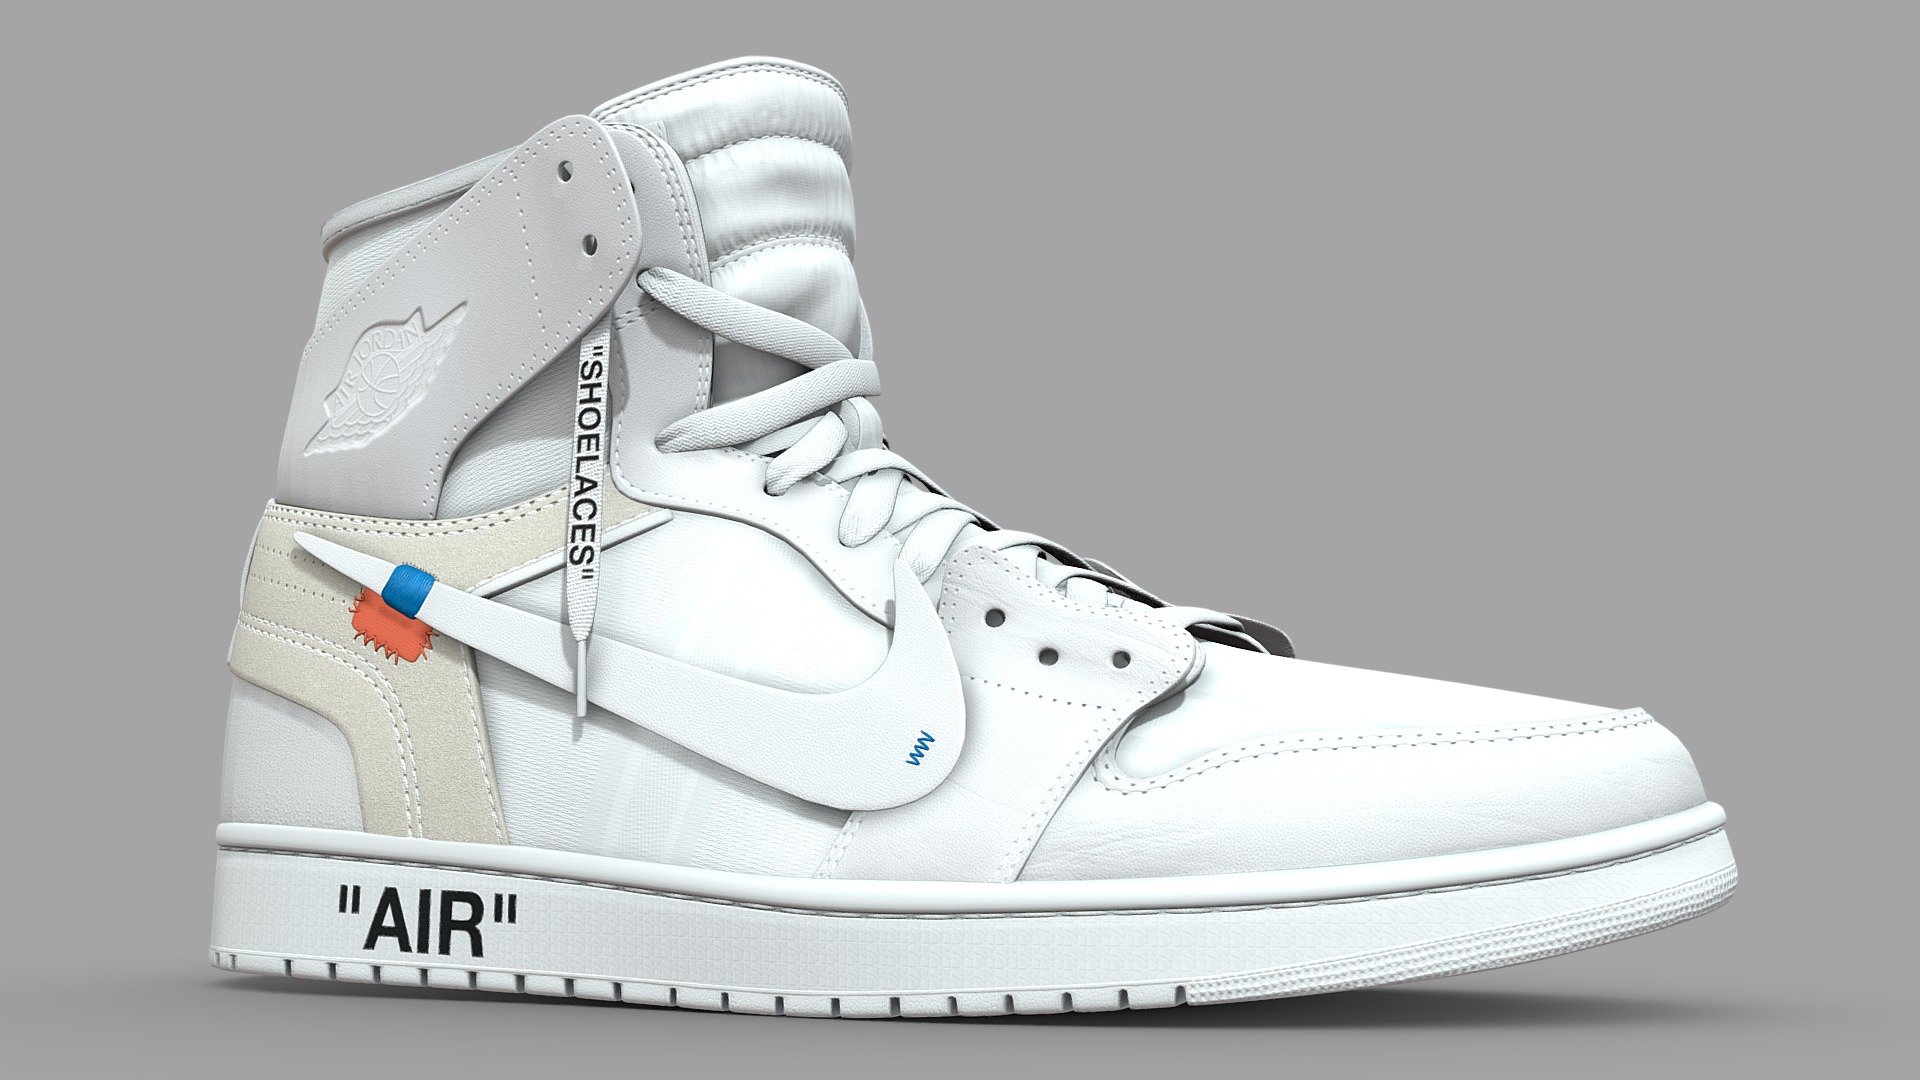 One of the most hyped sneakers of 2018. The Air Jordan 1 x Off White features a half finished, in construction type of look, with exposed foam and hastily stitched on swoosh. 

Modelled in Blender and textured in Substance, no detail went overlooked in the creation of this shoe. As a result it is subdivision ready. Unwrapped with quality at the forefront, the four texture sets allow the materials to take centre stage. 

What's included
Firstly, two versions of this model. The base version with 4 texture sets per shoe, and a One Mesh version that uses only 1 texture set per shoe. Both models are identical, only how they are unwrapped is different. The two texture sets have 5 maps, namely: Ambient Occlusion, Base Color, Metallic, Normal, and Roughness. All textures are 4096x4096. Meaning the One Mesh version has 4 2048x2048 textures 3d model